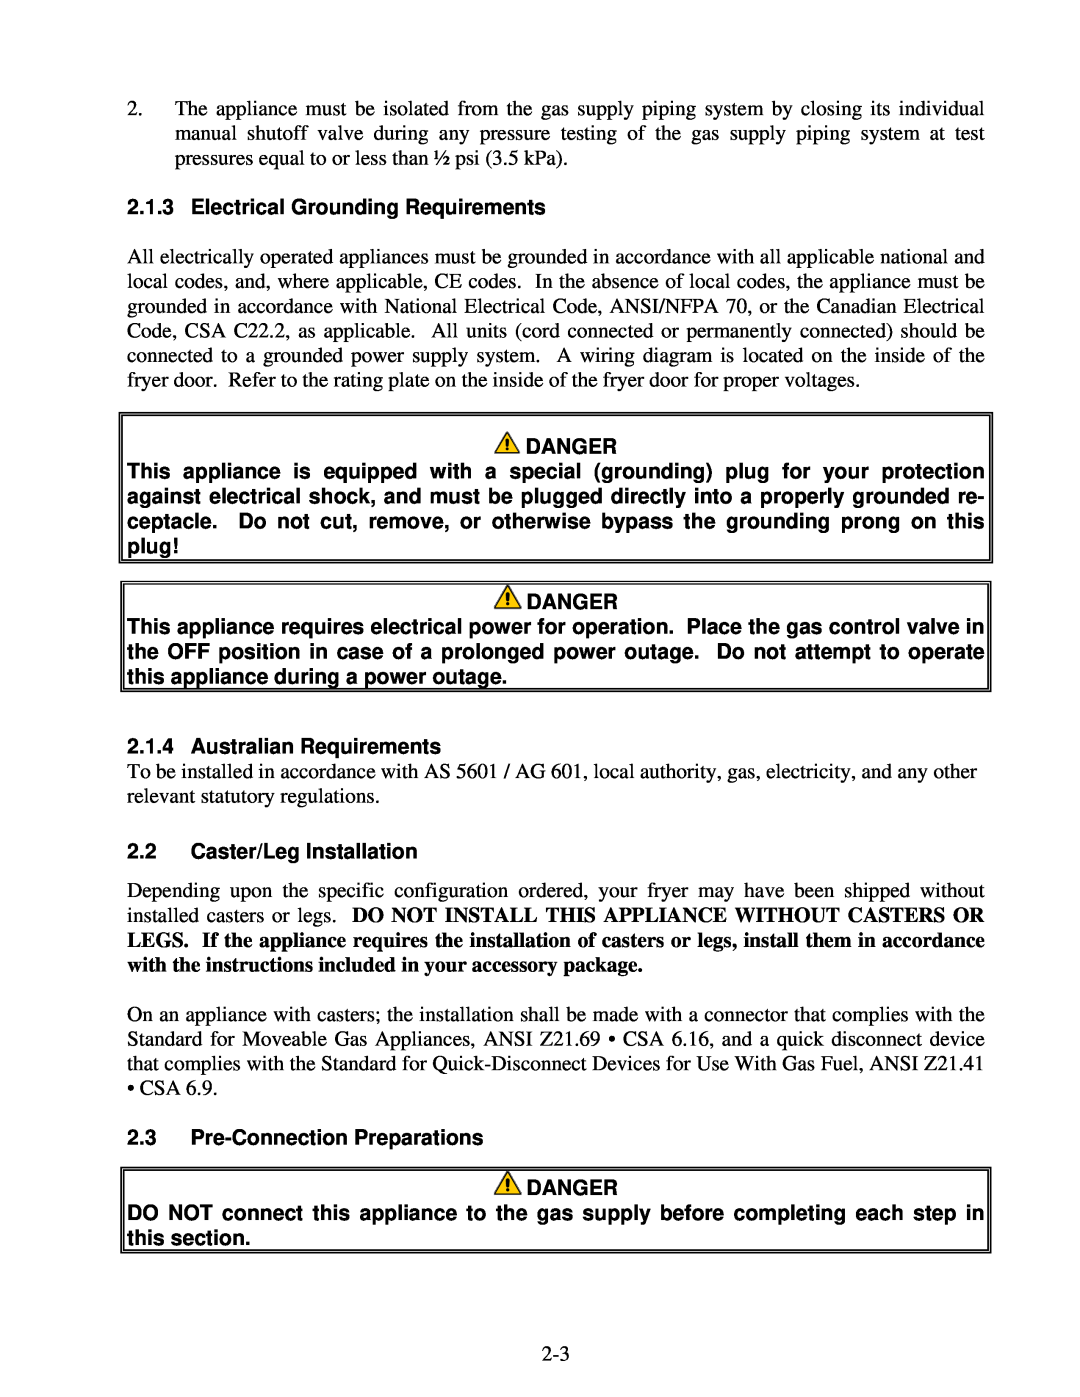 Frymaster 8196339 Electrical Grounding Requirements, Australian Requirements, Caster/Leg Installation, Danger 